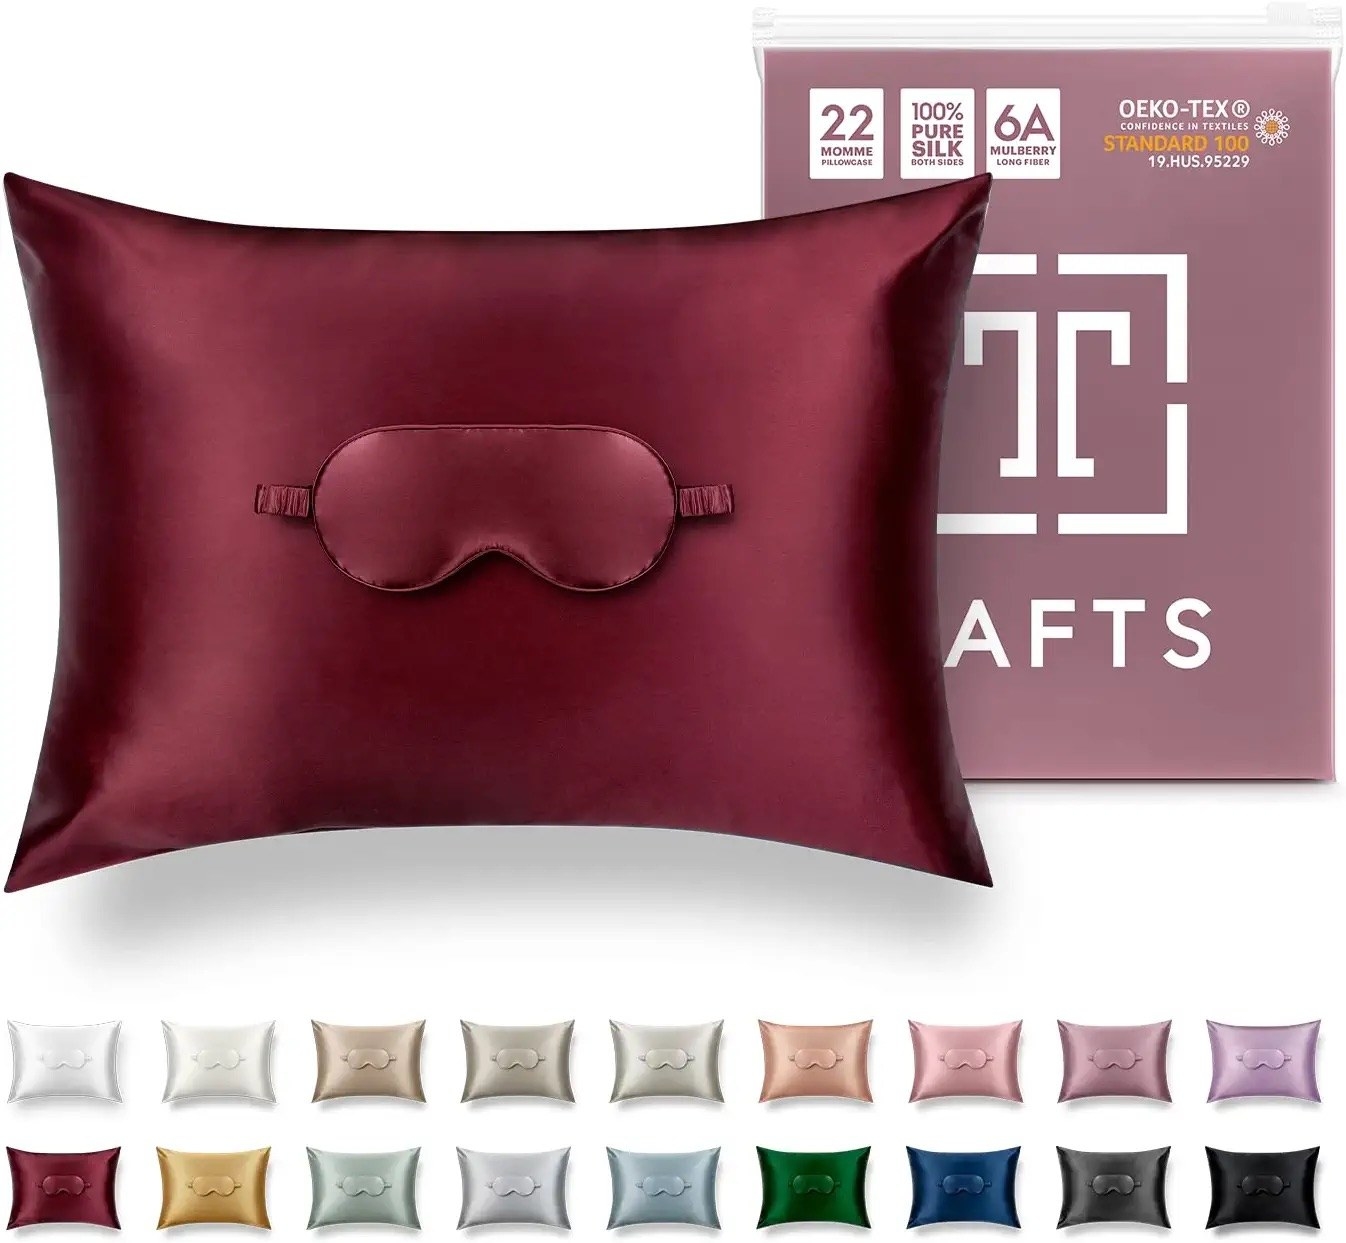 A silk pillowcase and eyemask in a deep red color.